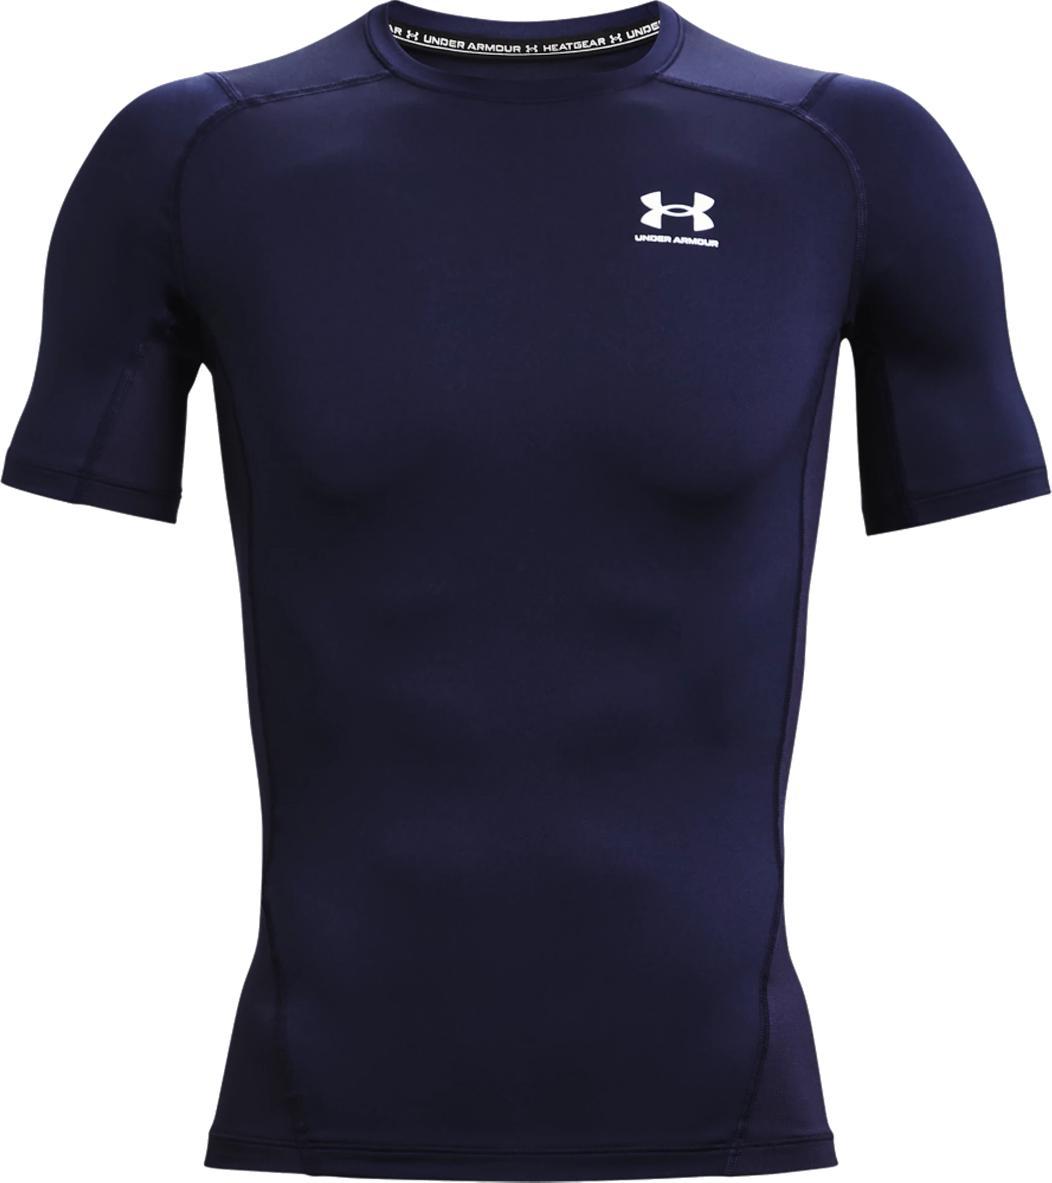 UNDER ARMOUR – Page 2 – AITO EXPRESS